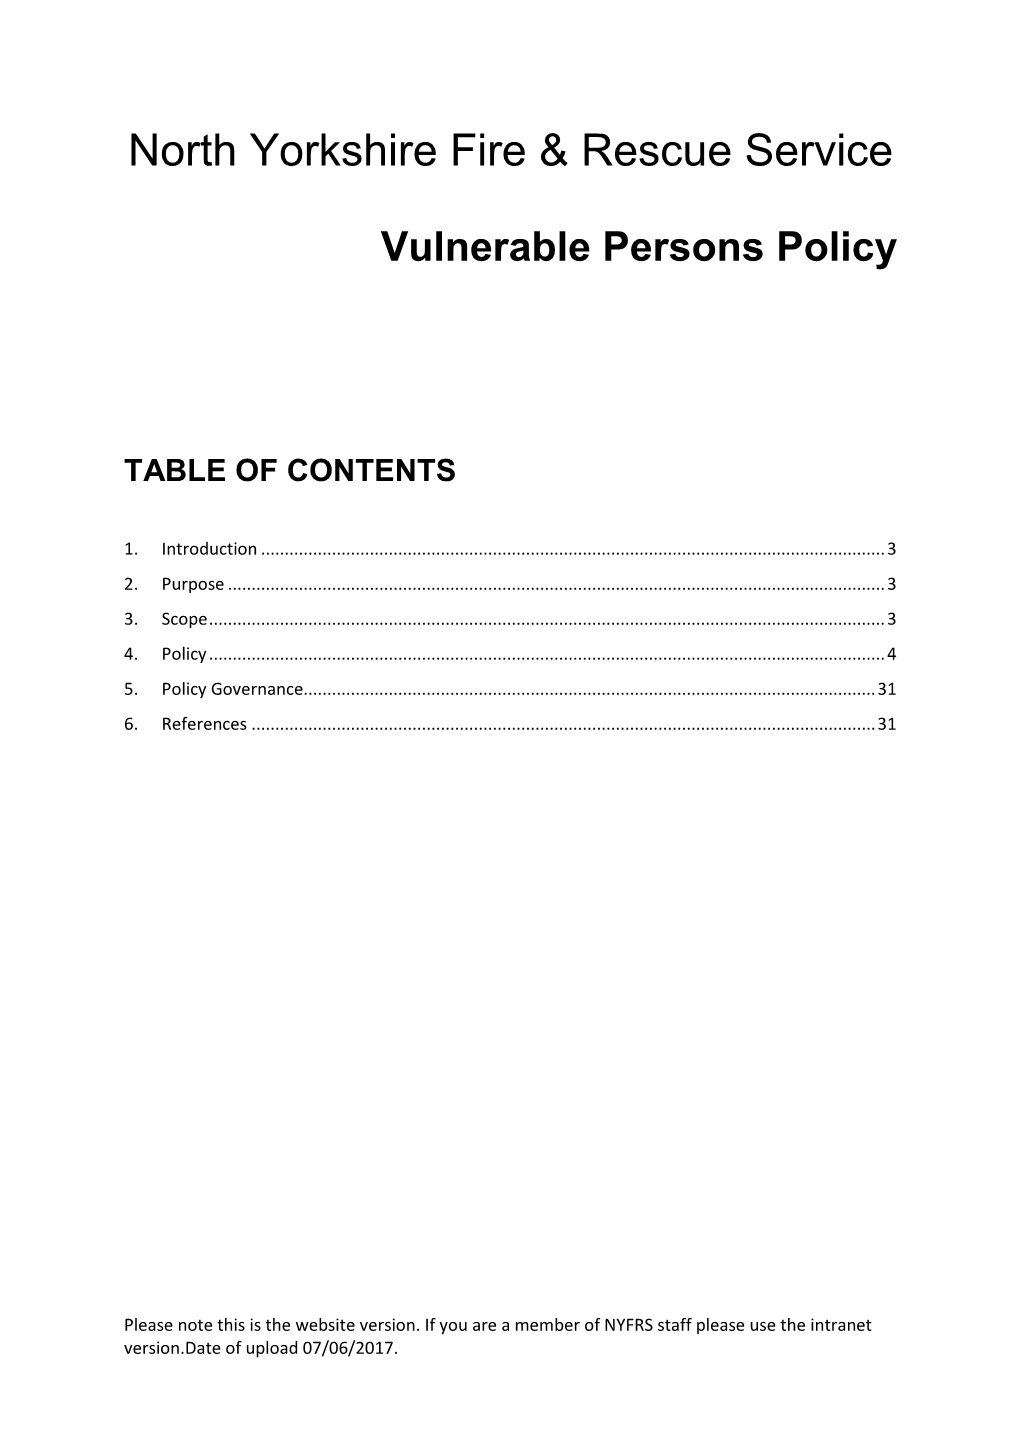 Vulnerable Persons Policy